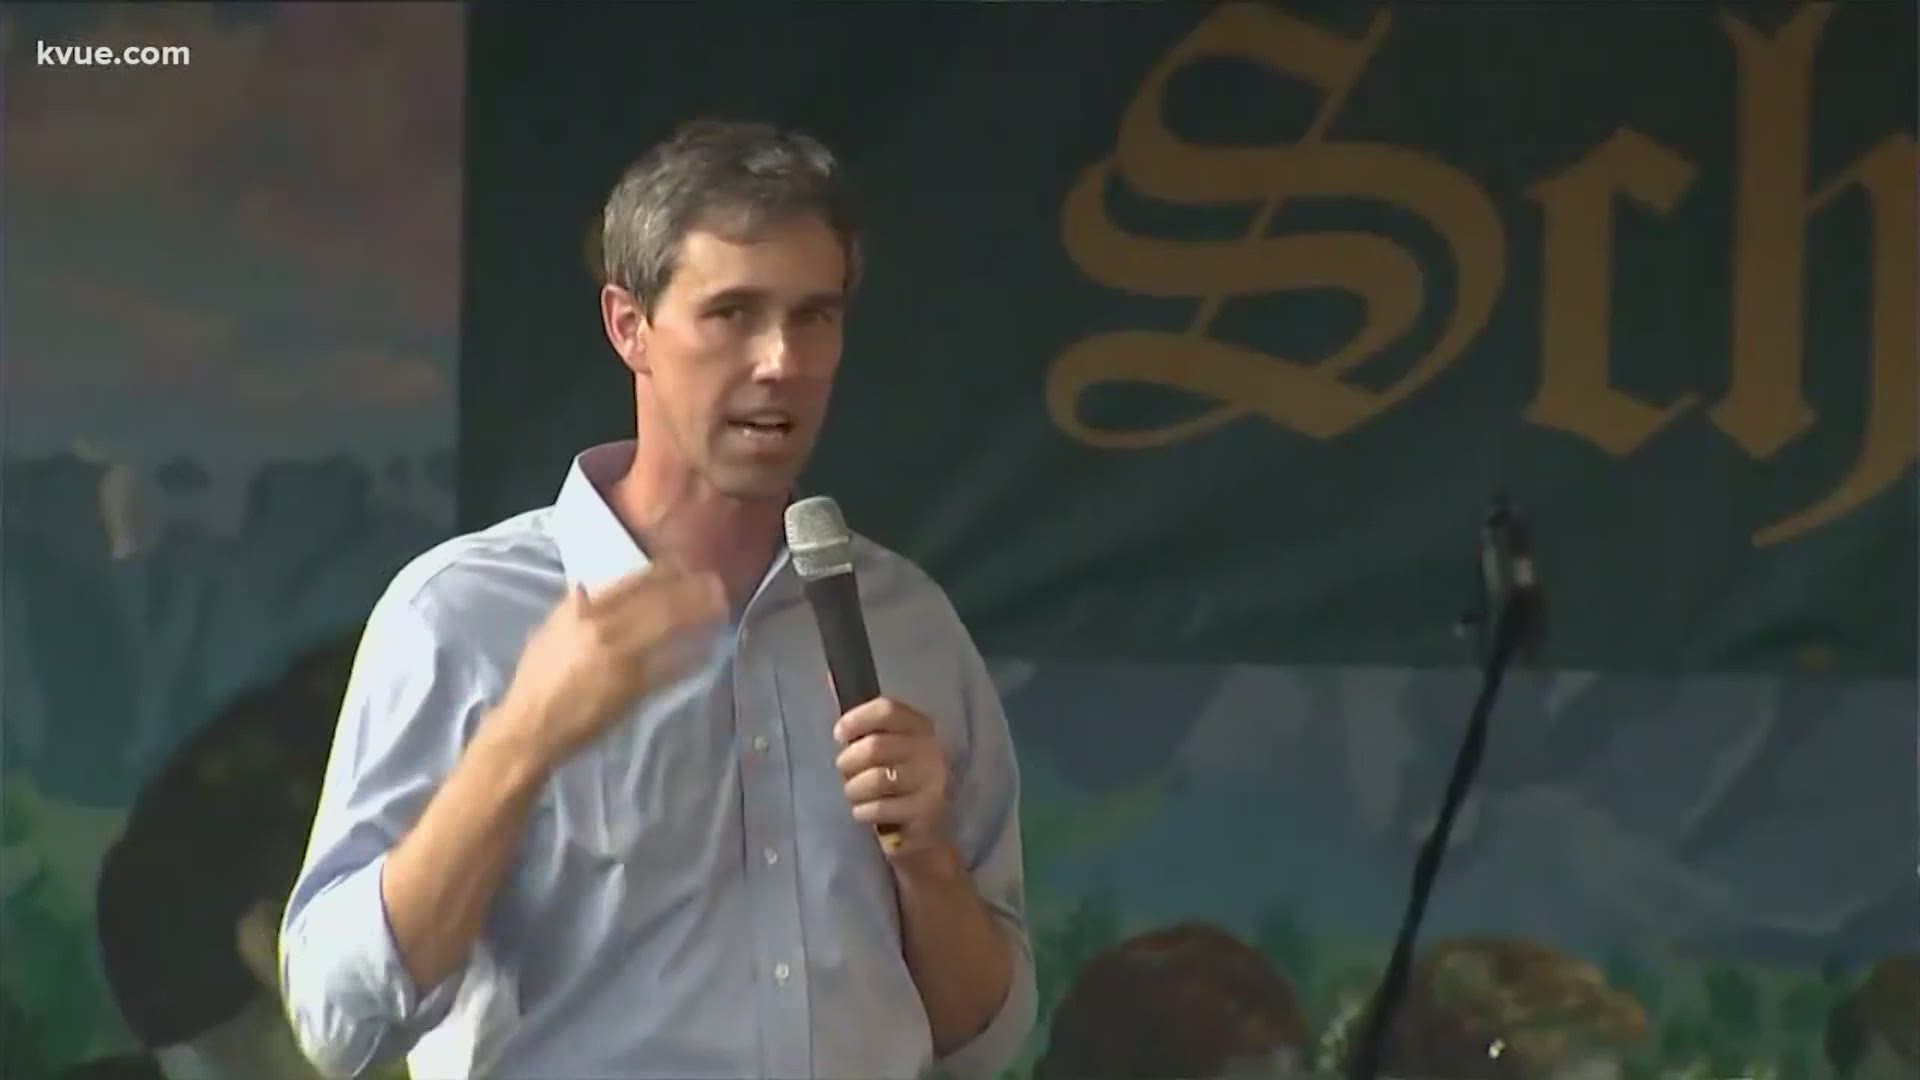 Former Texas Congressman Beto O'Rourke plans to teach at Texas State University in the spring.